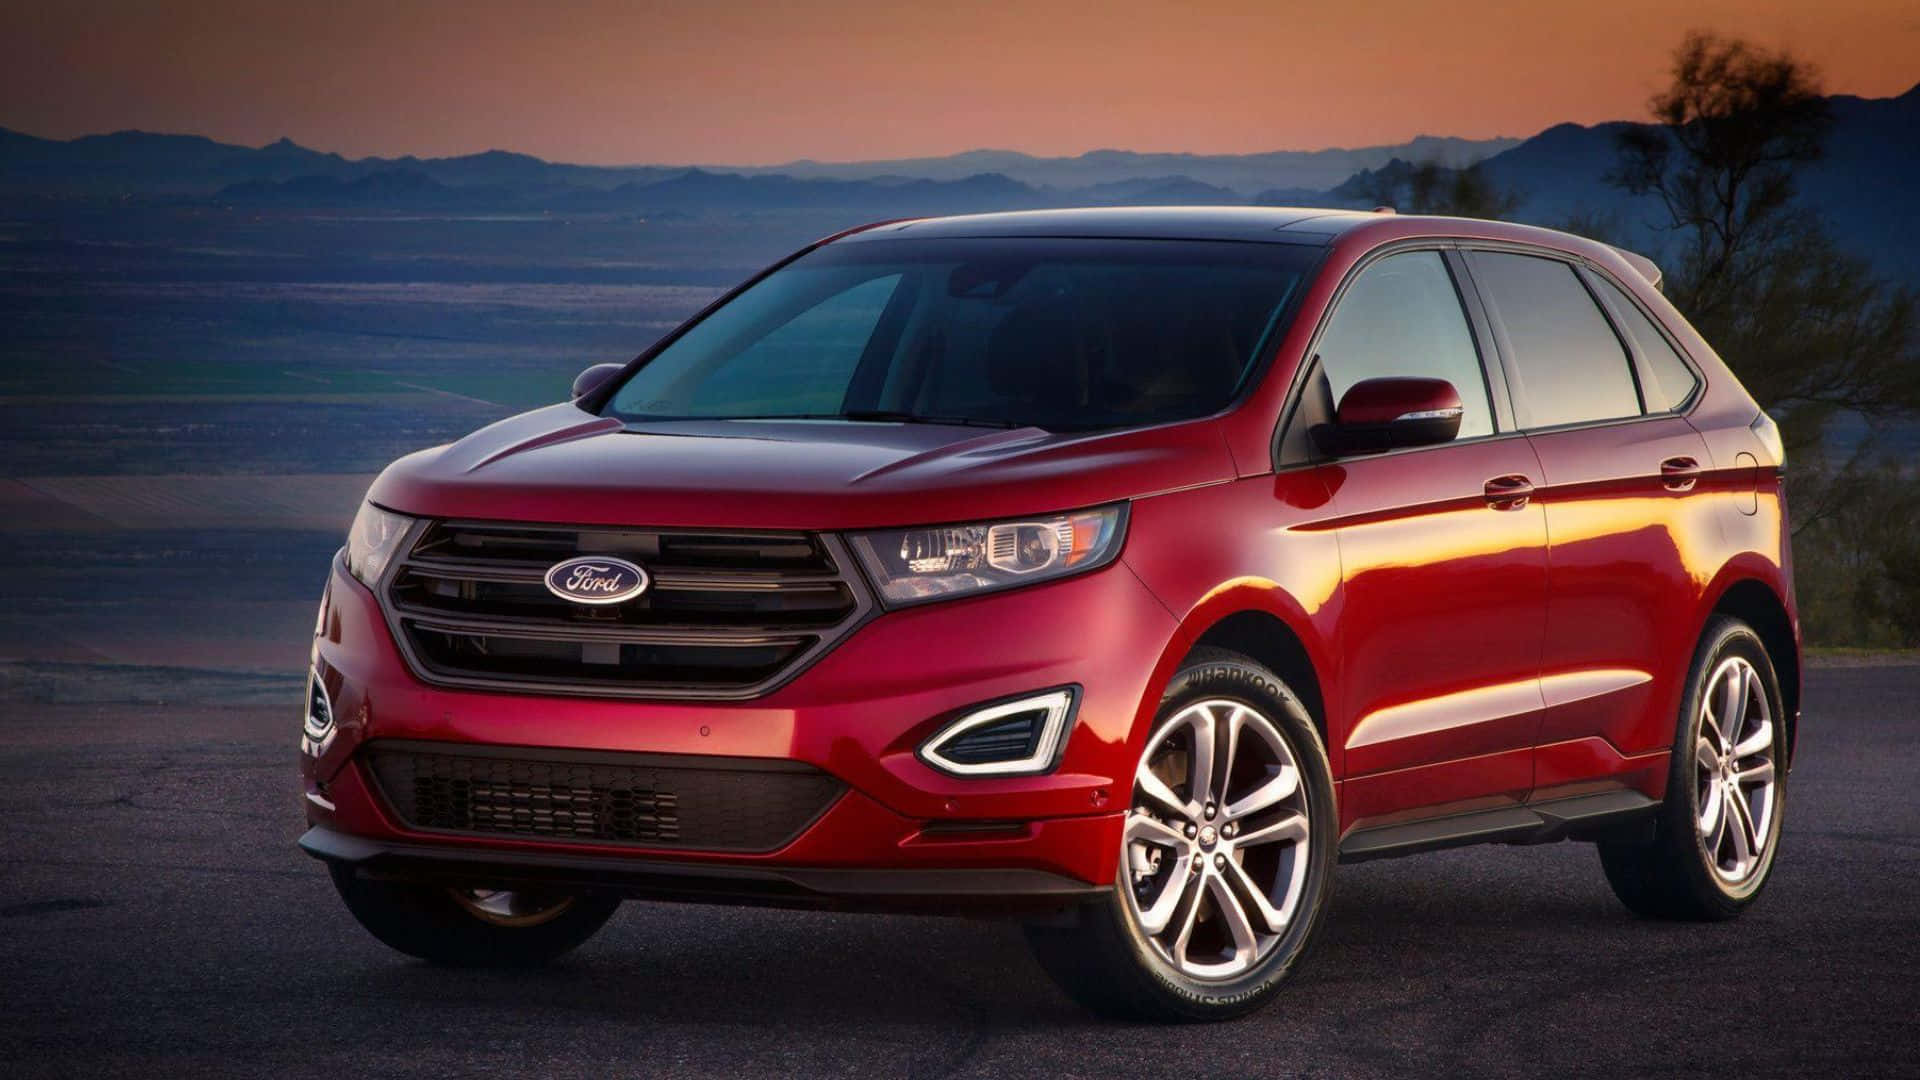 The Sleek and Stylish Ford Edge SUV Driving On a Scenic Route Wallpaper